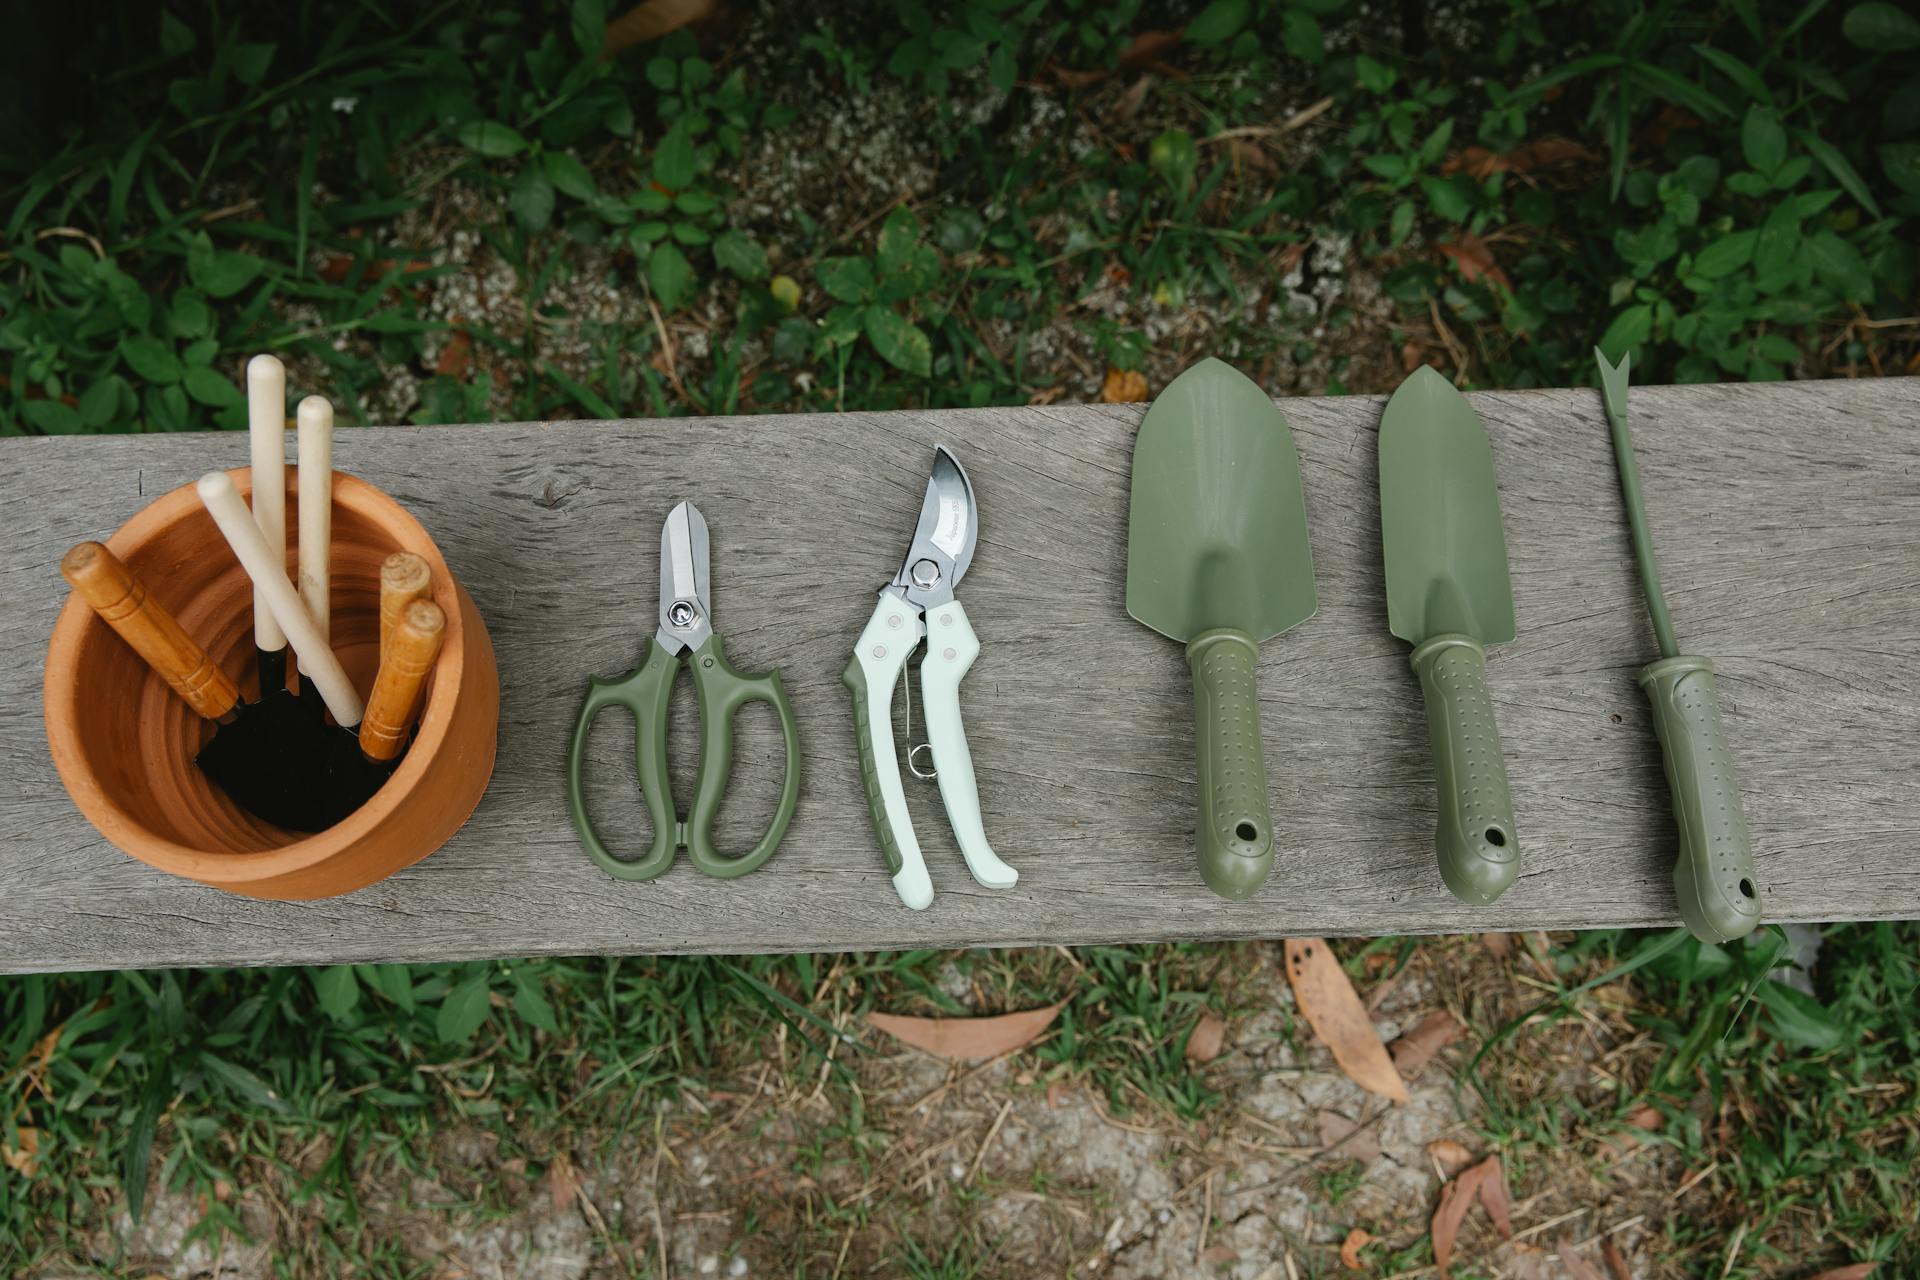 A collection of gardening tools lies on a wooden bench.